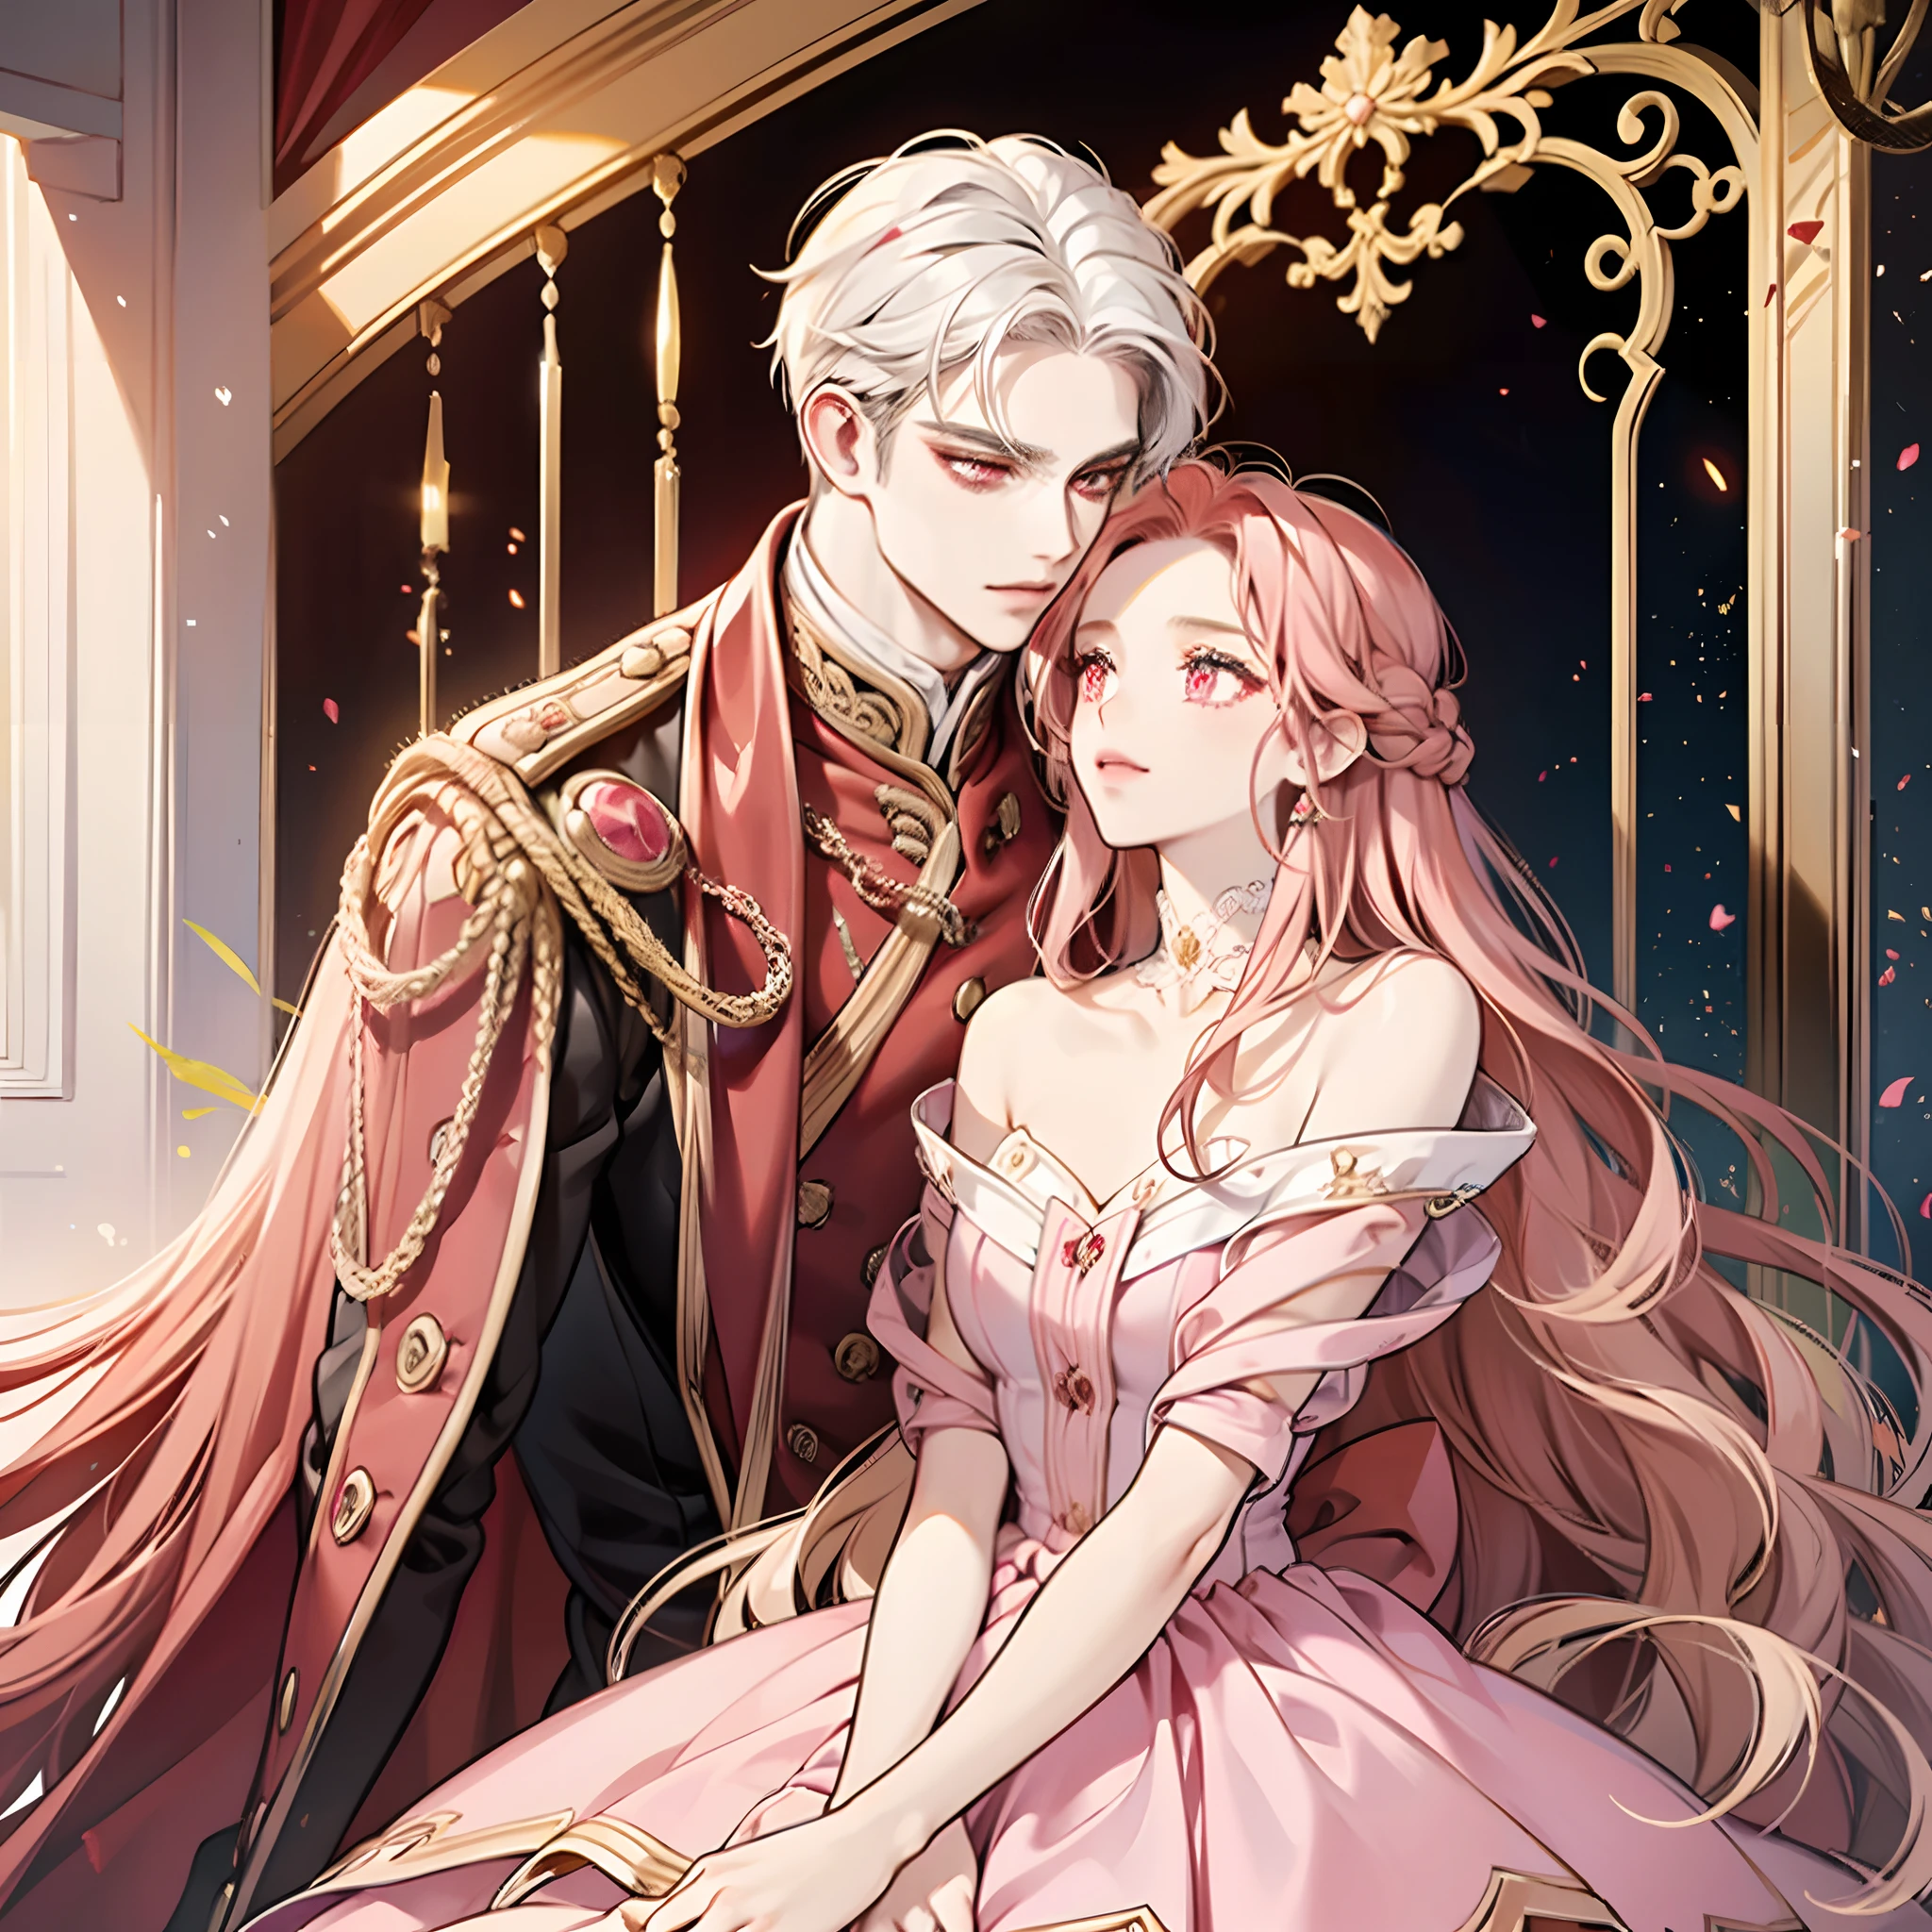 1 man with long straight red hair and golden eyes hugging 1 woman with wavy white hair and pink eyes, royalty, elegant, high quality, highly detailed, detailed face, masterpiece, standing